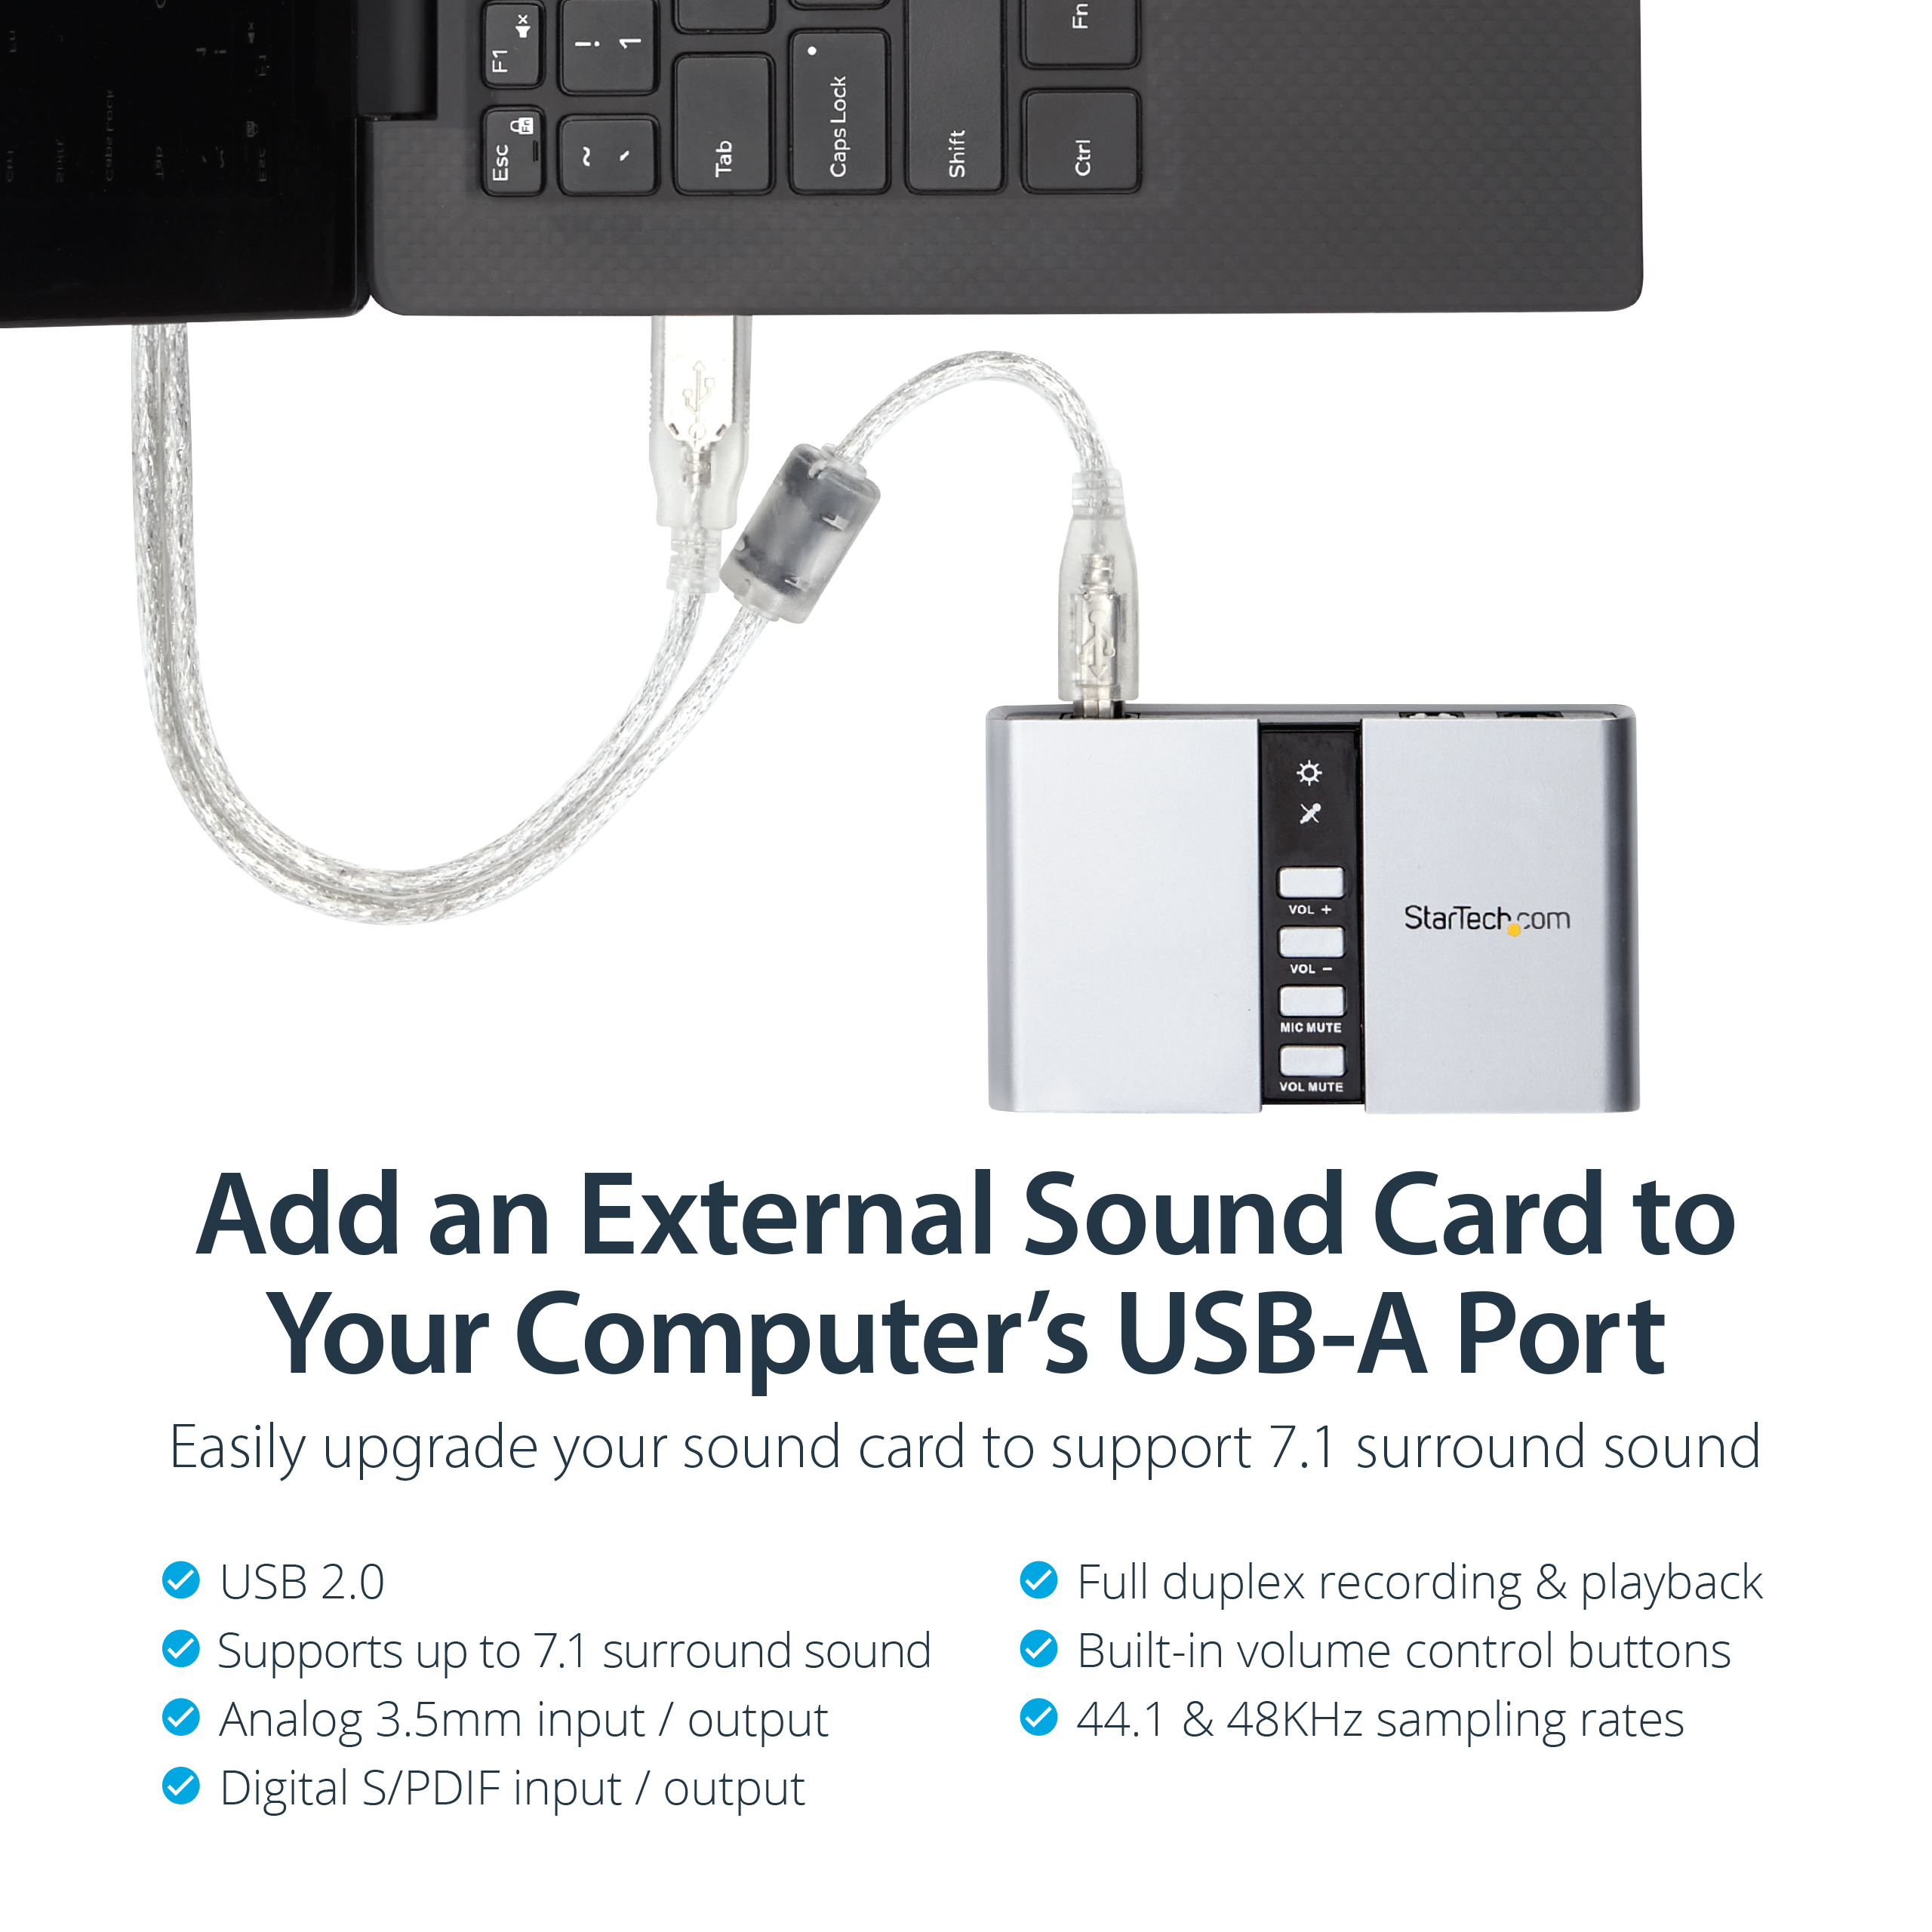 StarTech.com 7.1 USB Sound Card - External Sound Card for Laptop with SPDIF Digital Audio - Sound Card for PC - Silver - image 2 of 6